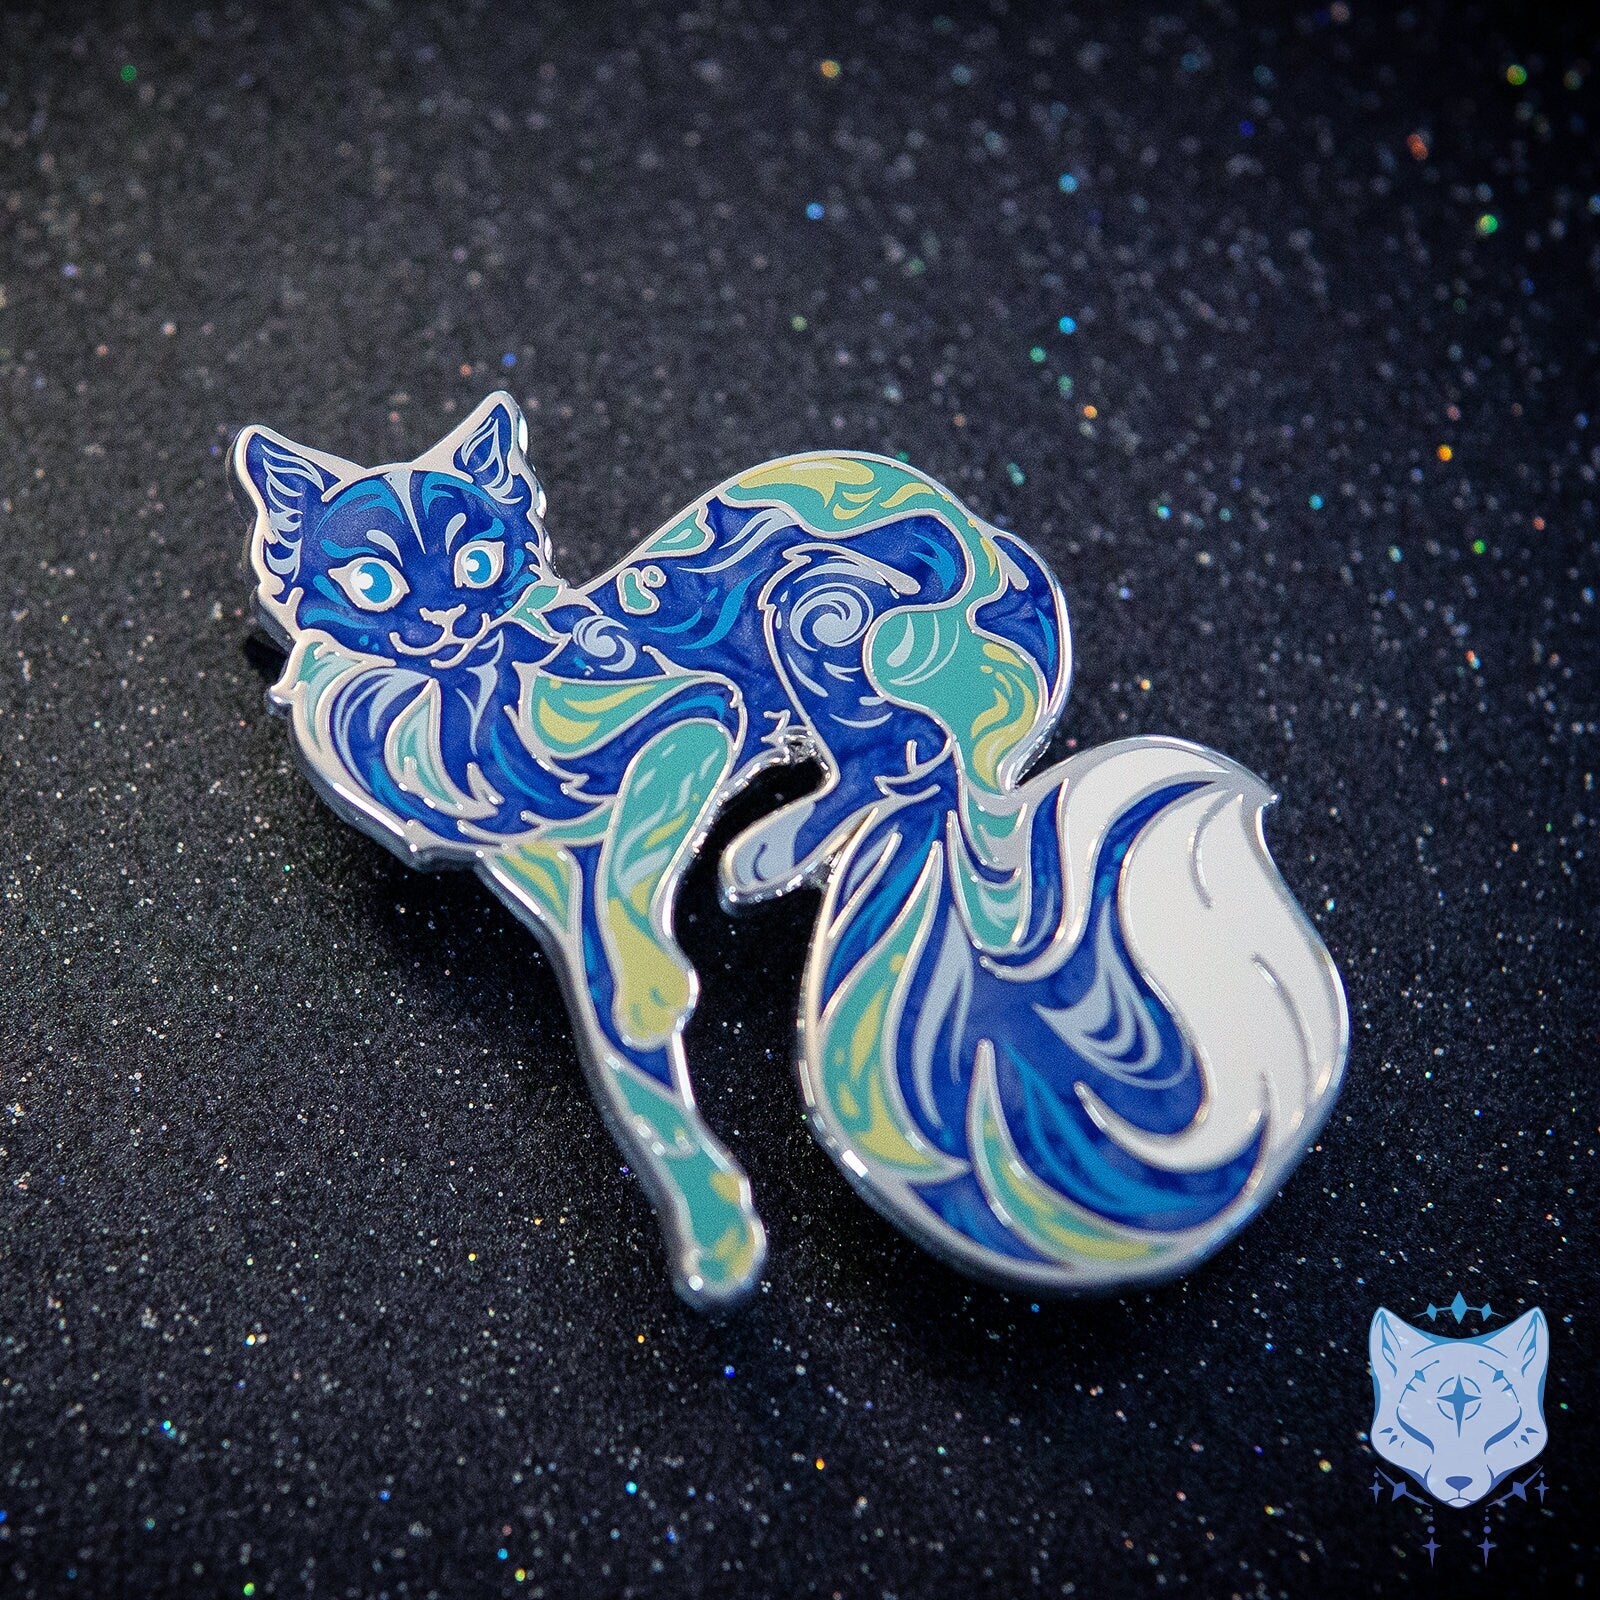 Earth Day Cat Planet Pin -  65mm / 2.55" Space Cat enamel pin